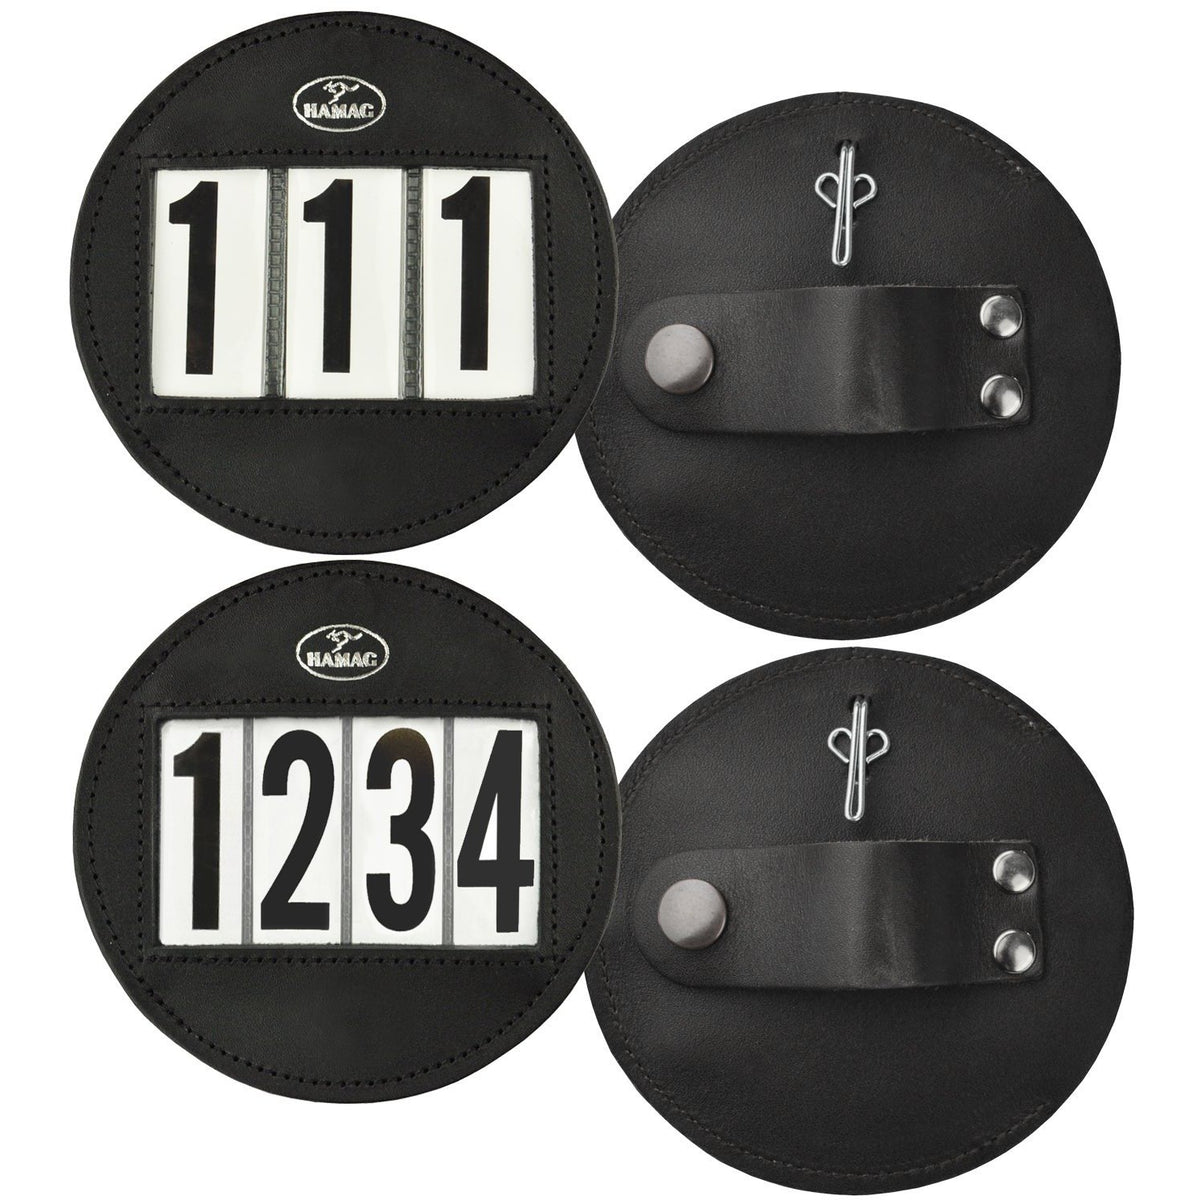 Hamag Leather Bridle Number Holders Round